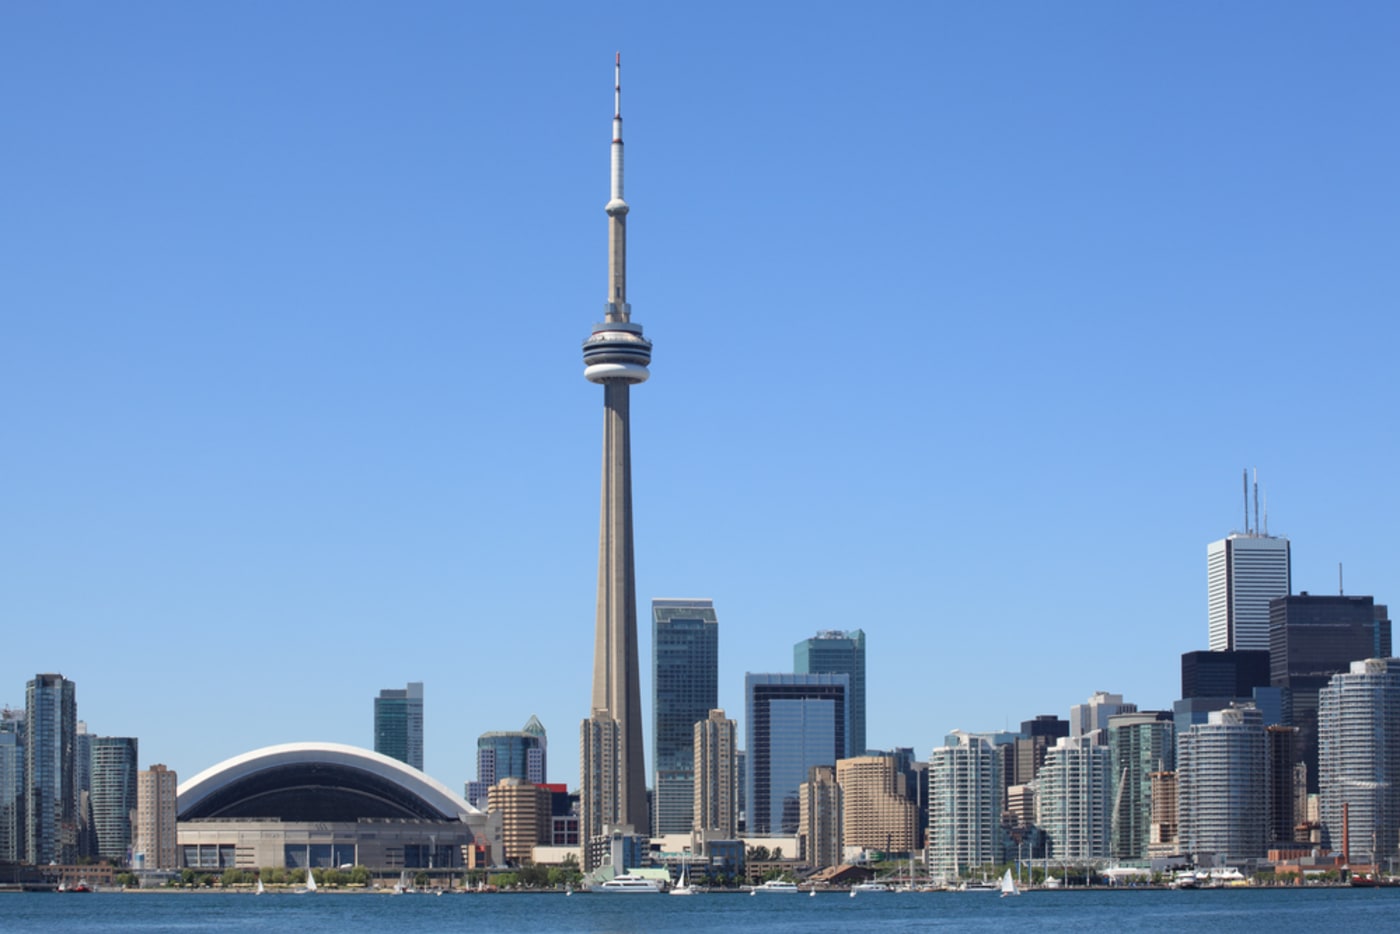 According to a study by The Economist, Toronto is the world’s best city